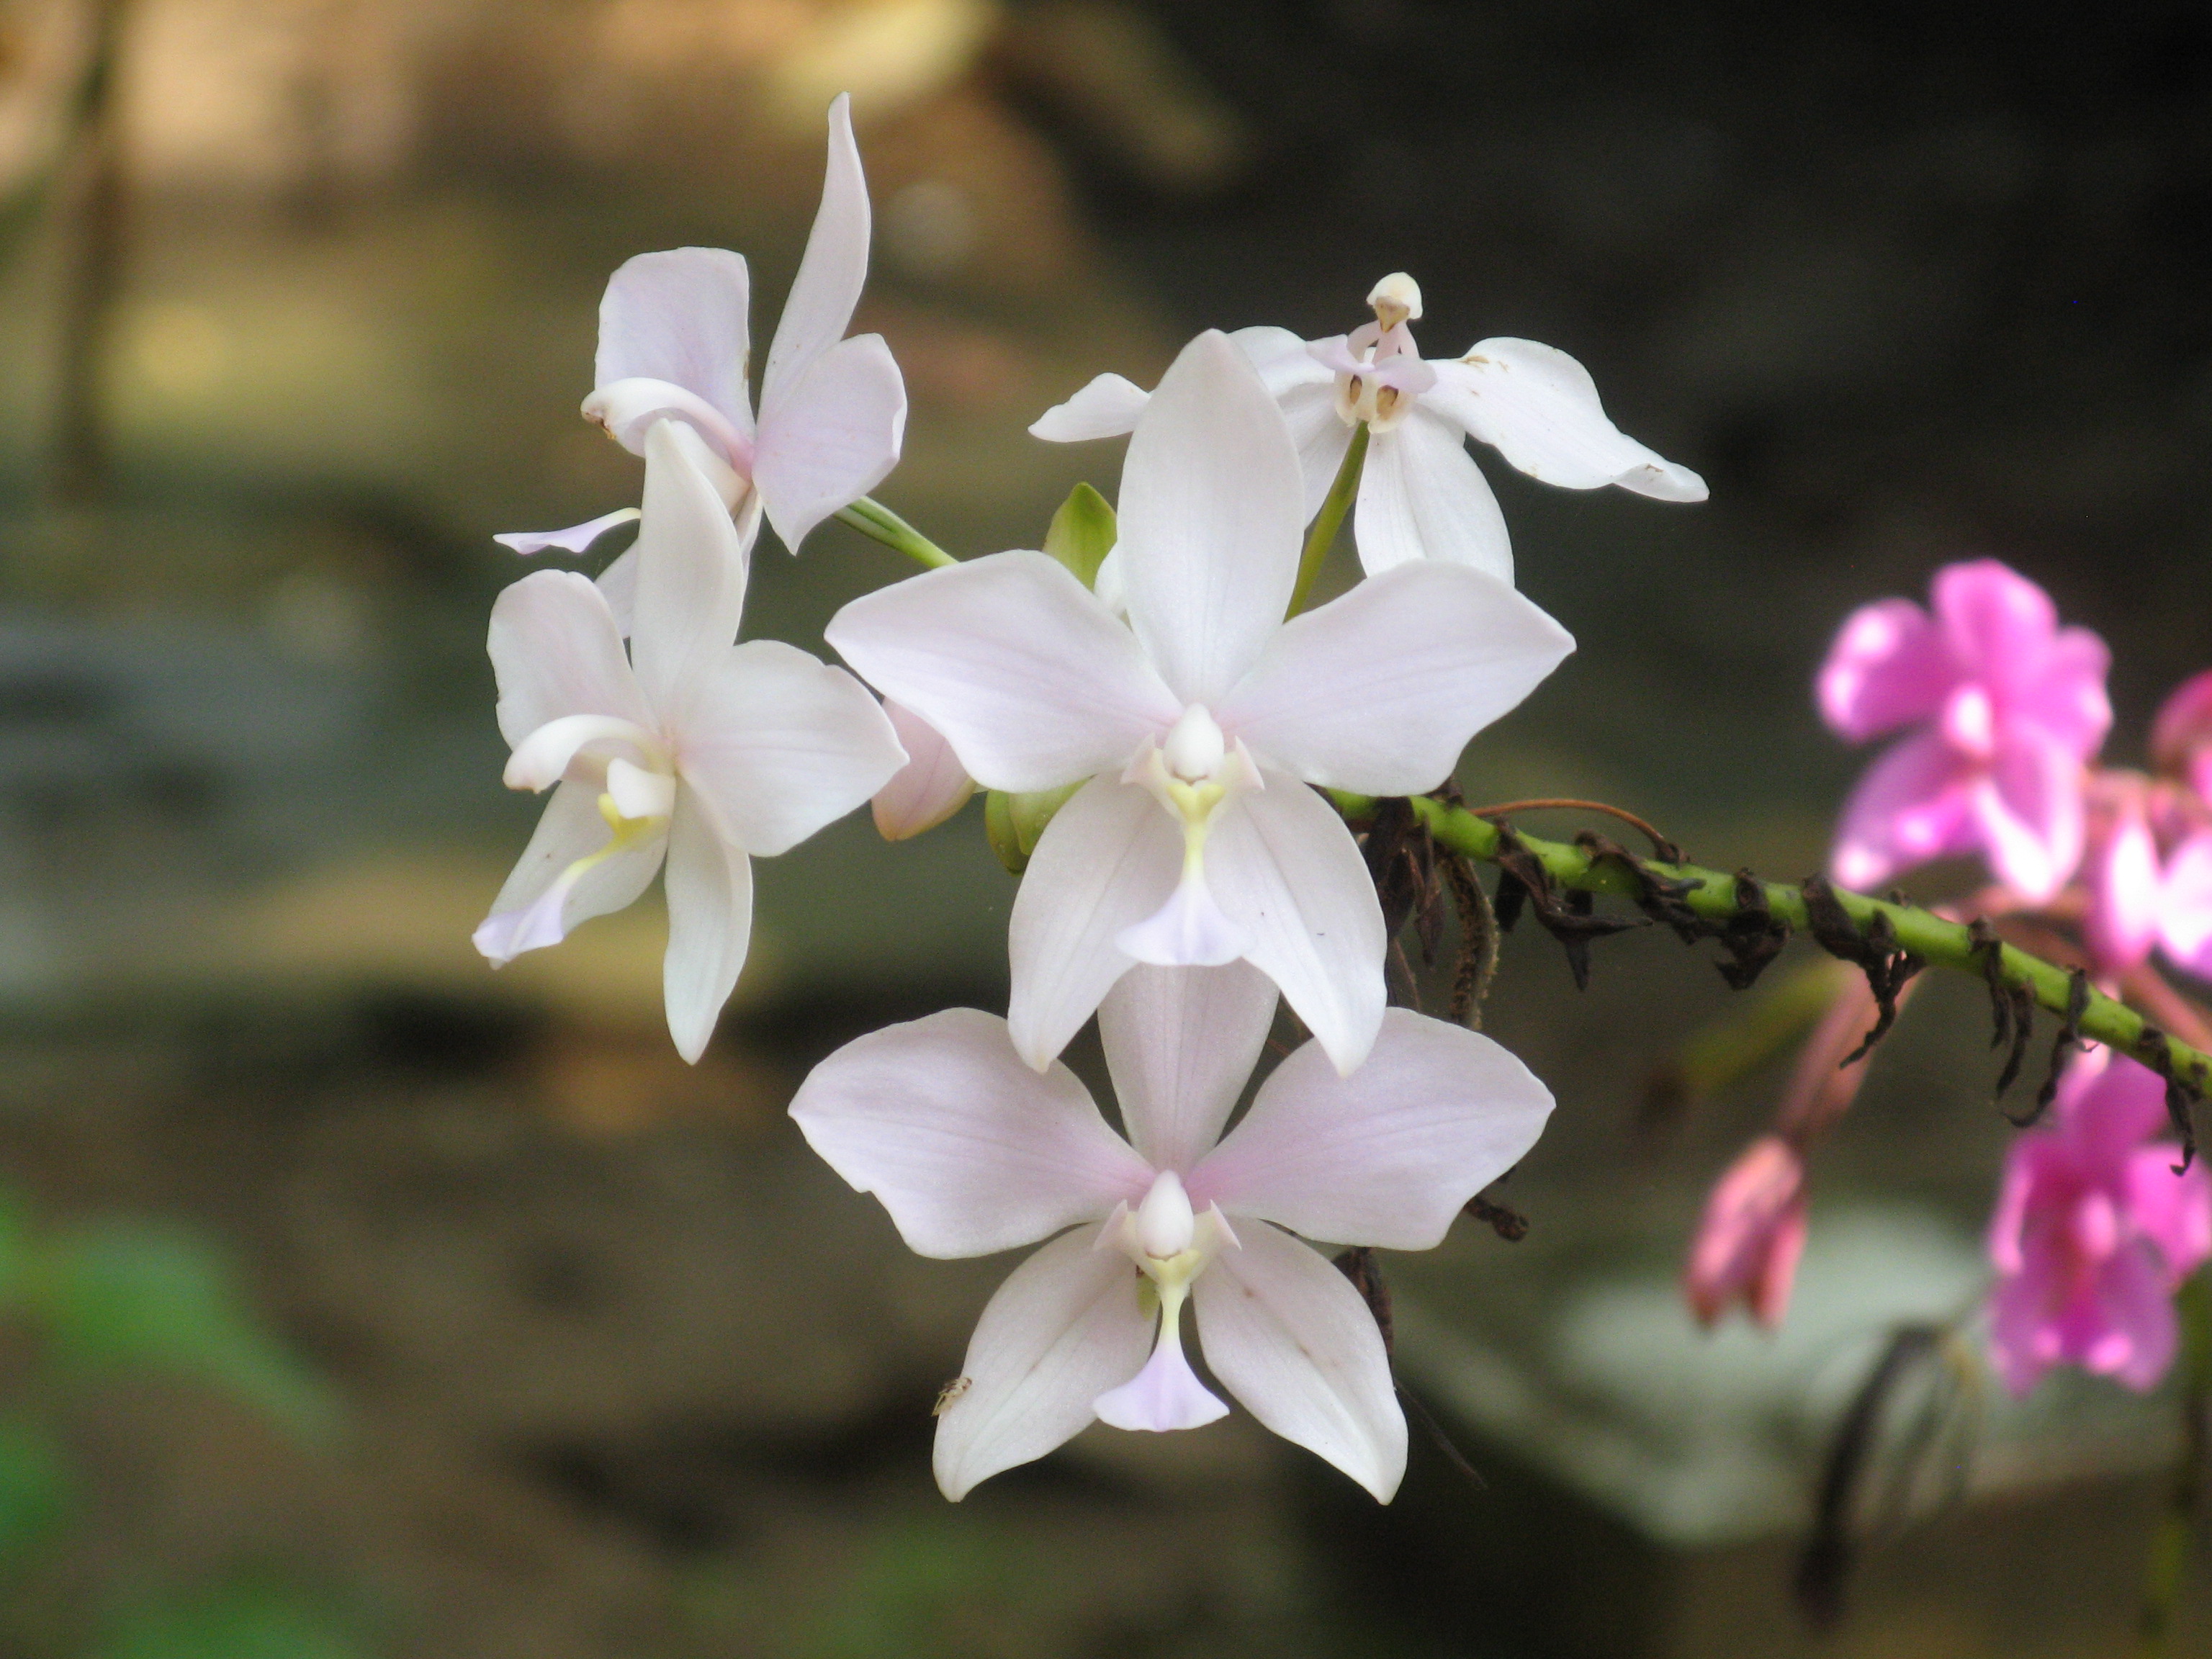 File:White Orchid Flowers.jpg - Wikimedia Commons